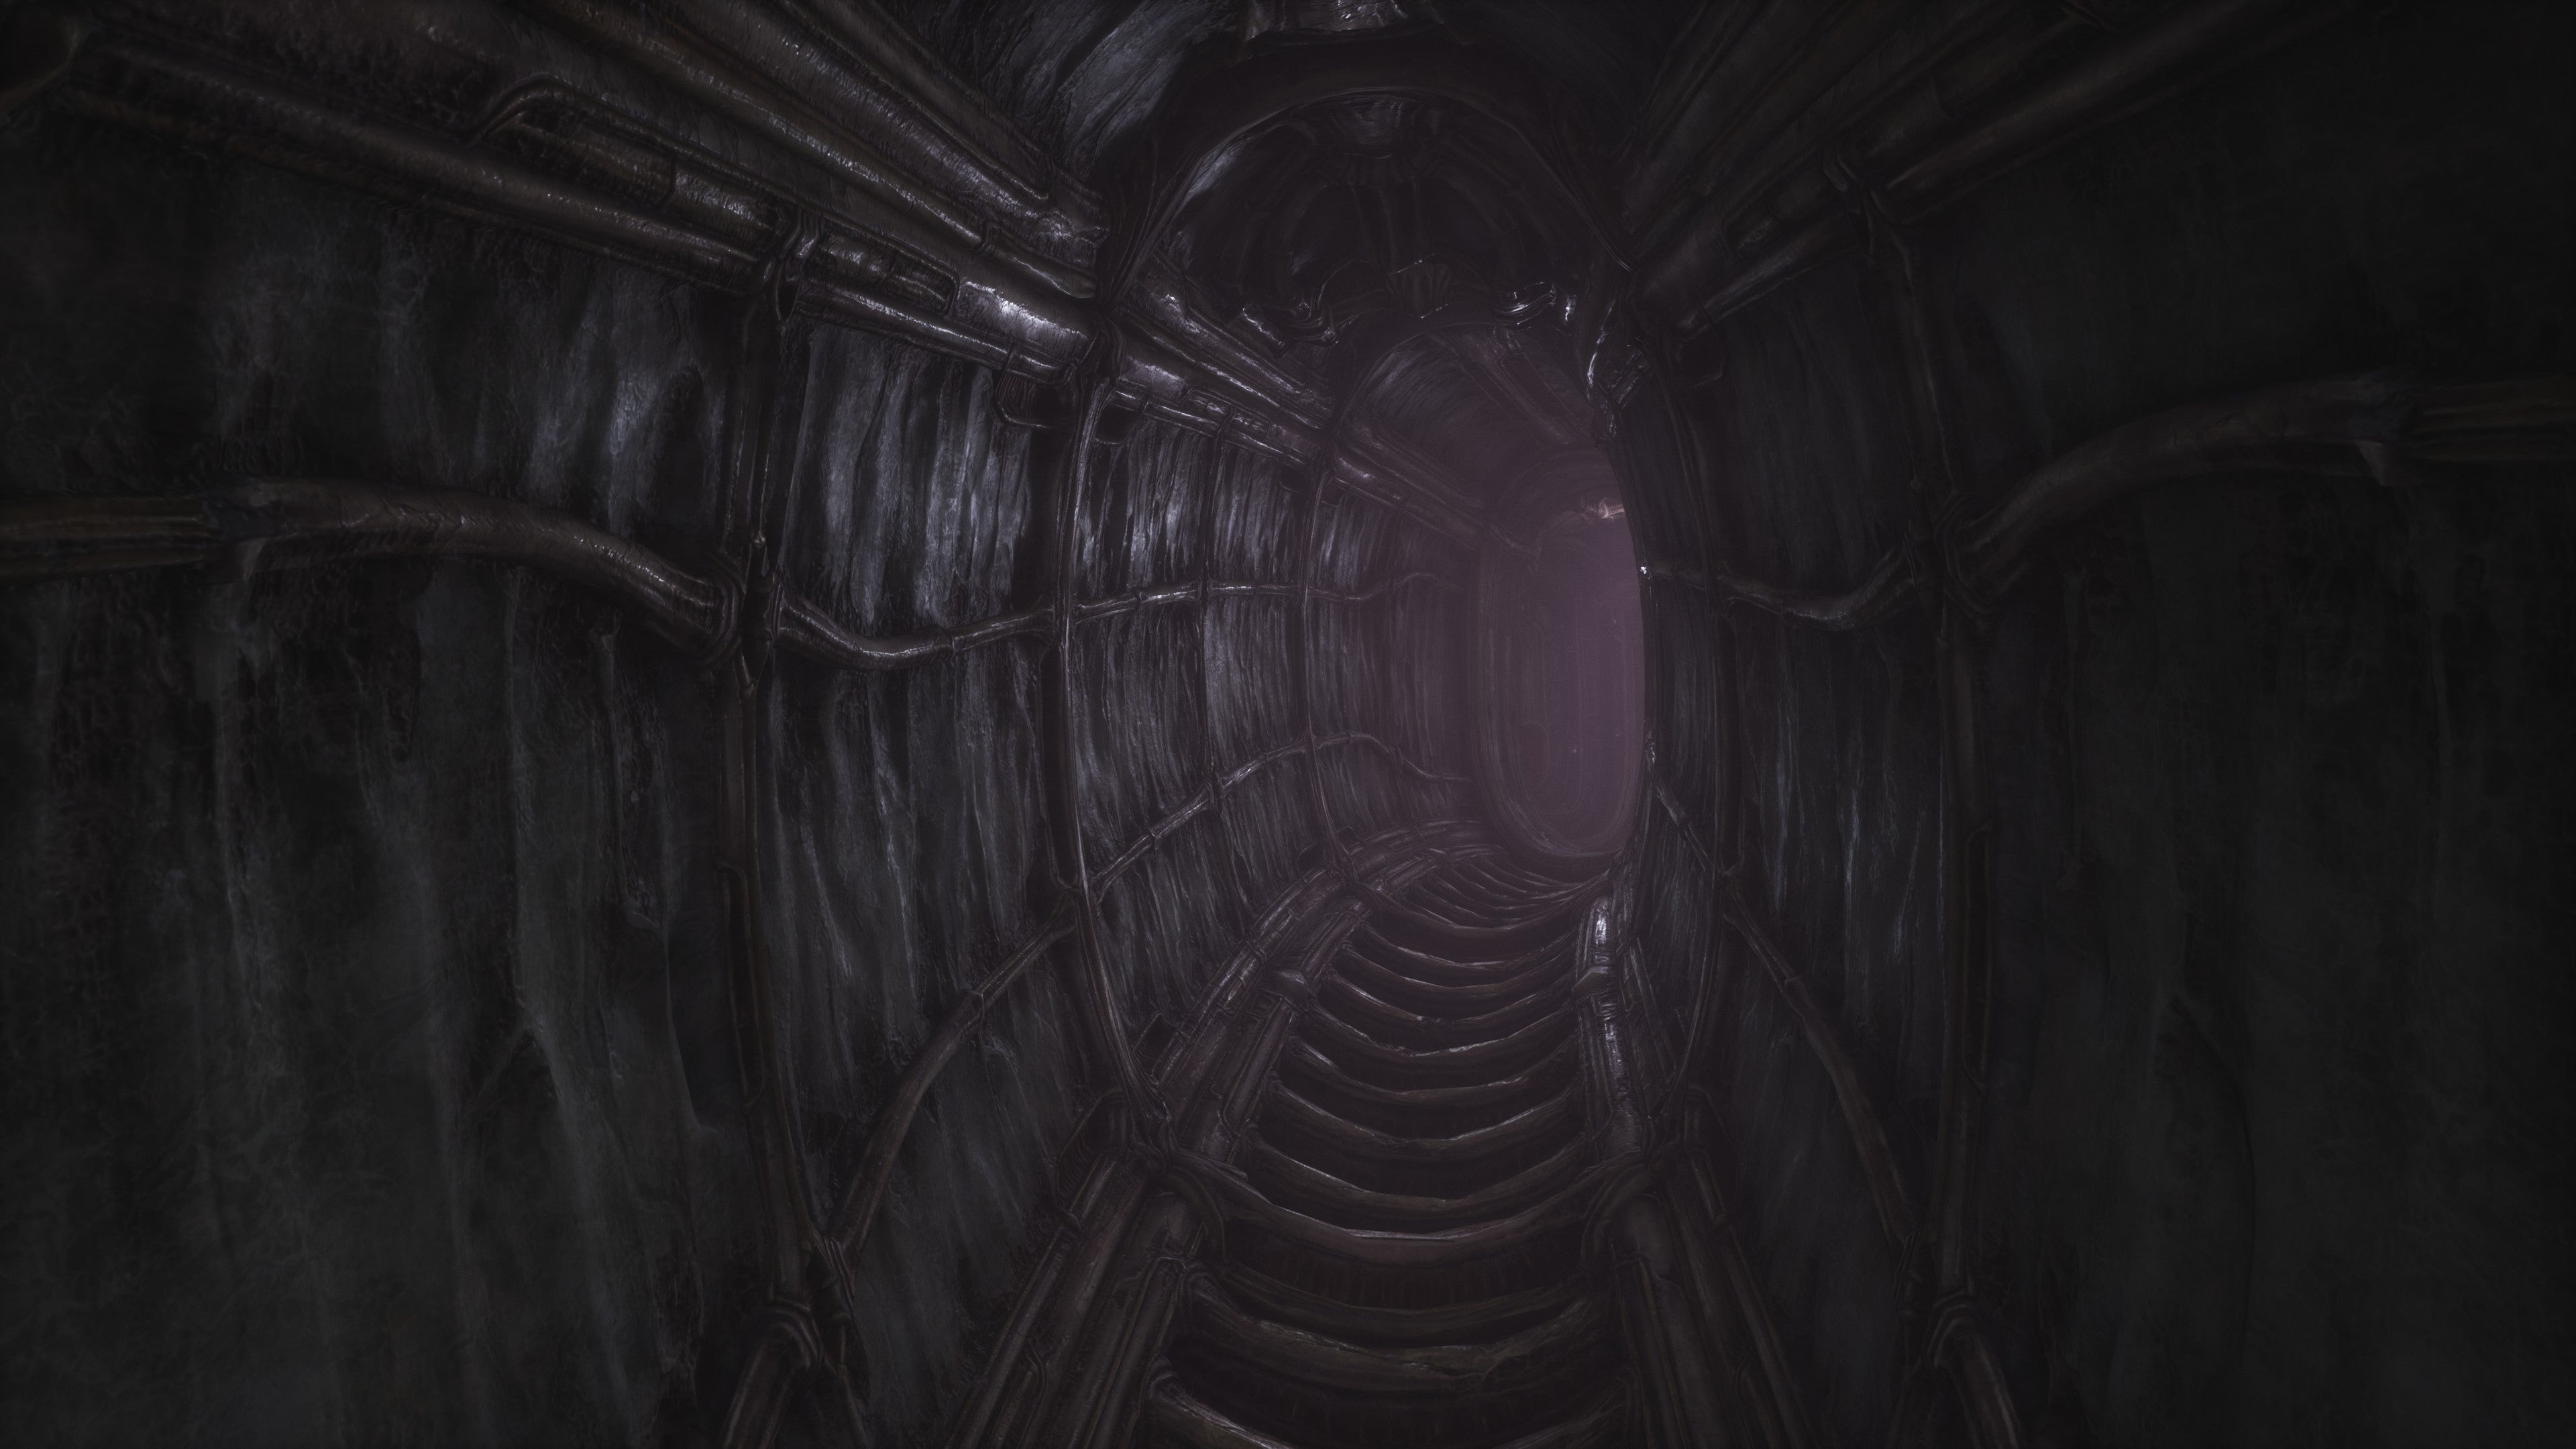 Scorn review - a narrow, more mechanical-looking corridor with a dim light at the end